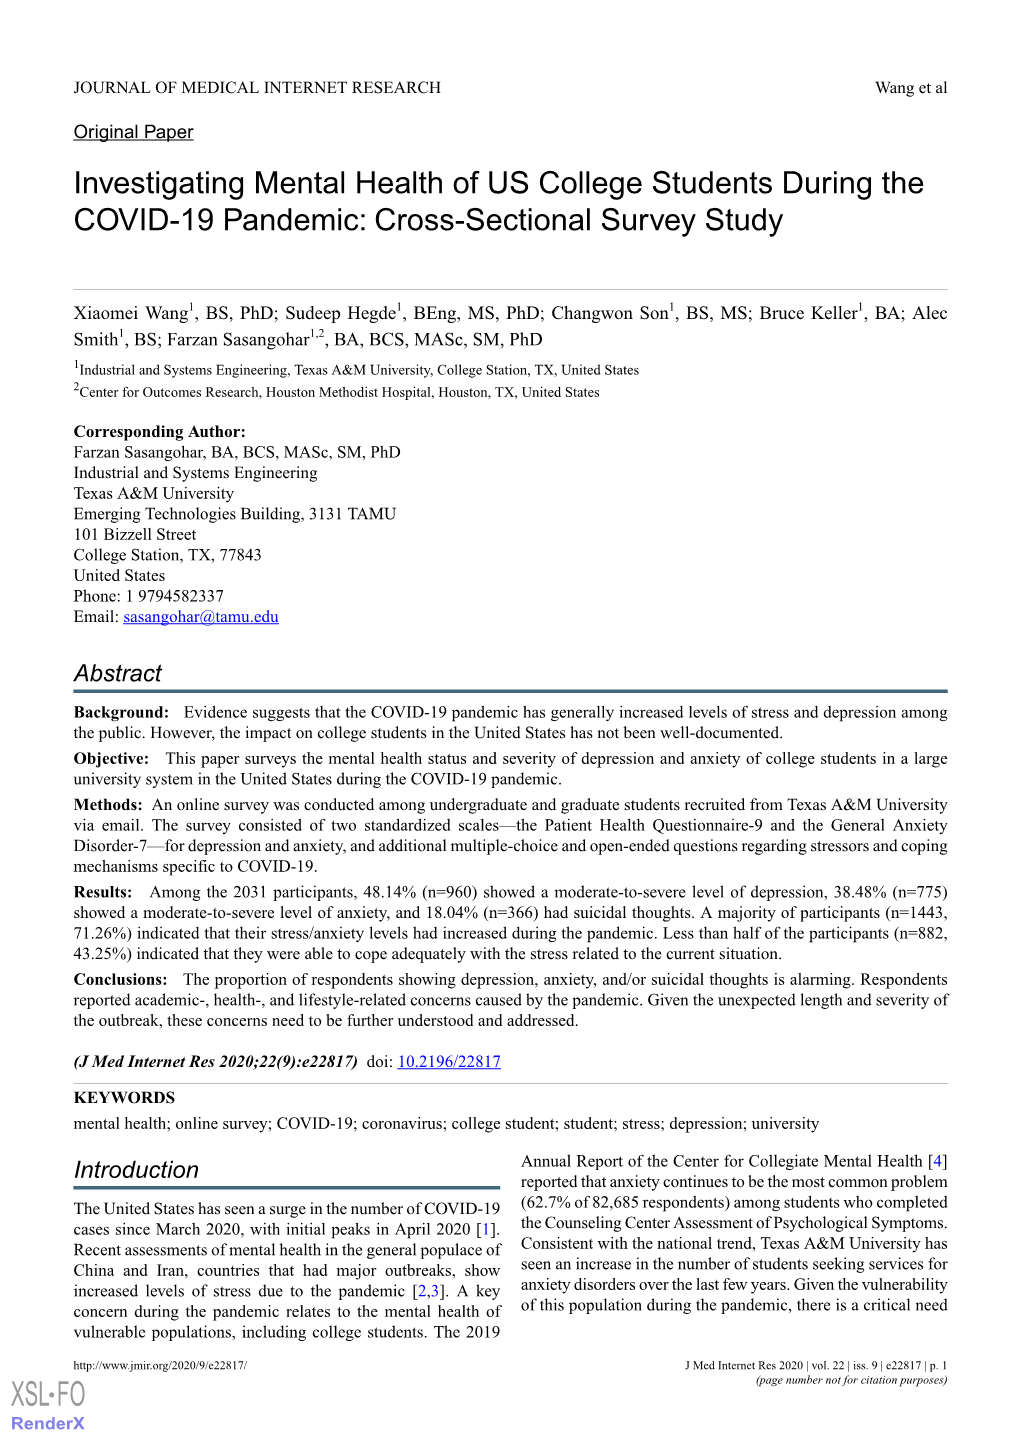 Investigating Mental Health of US College Students During the COVID-19 Pandemic: Cross-Sectional Survey Study